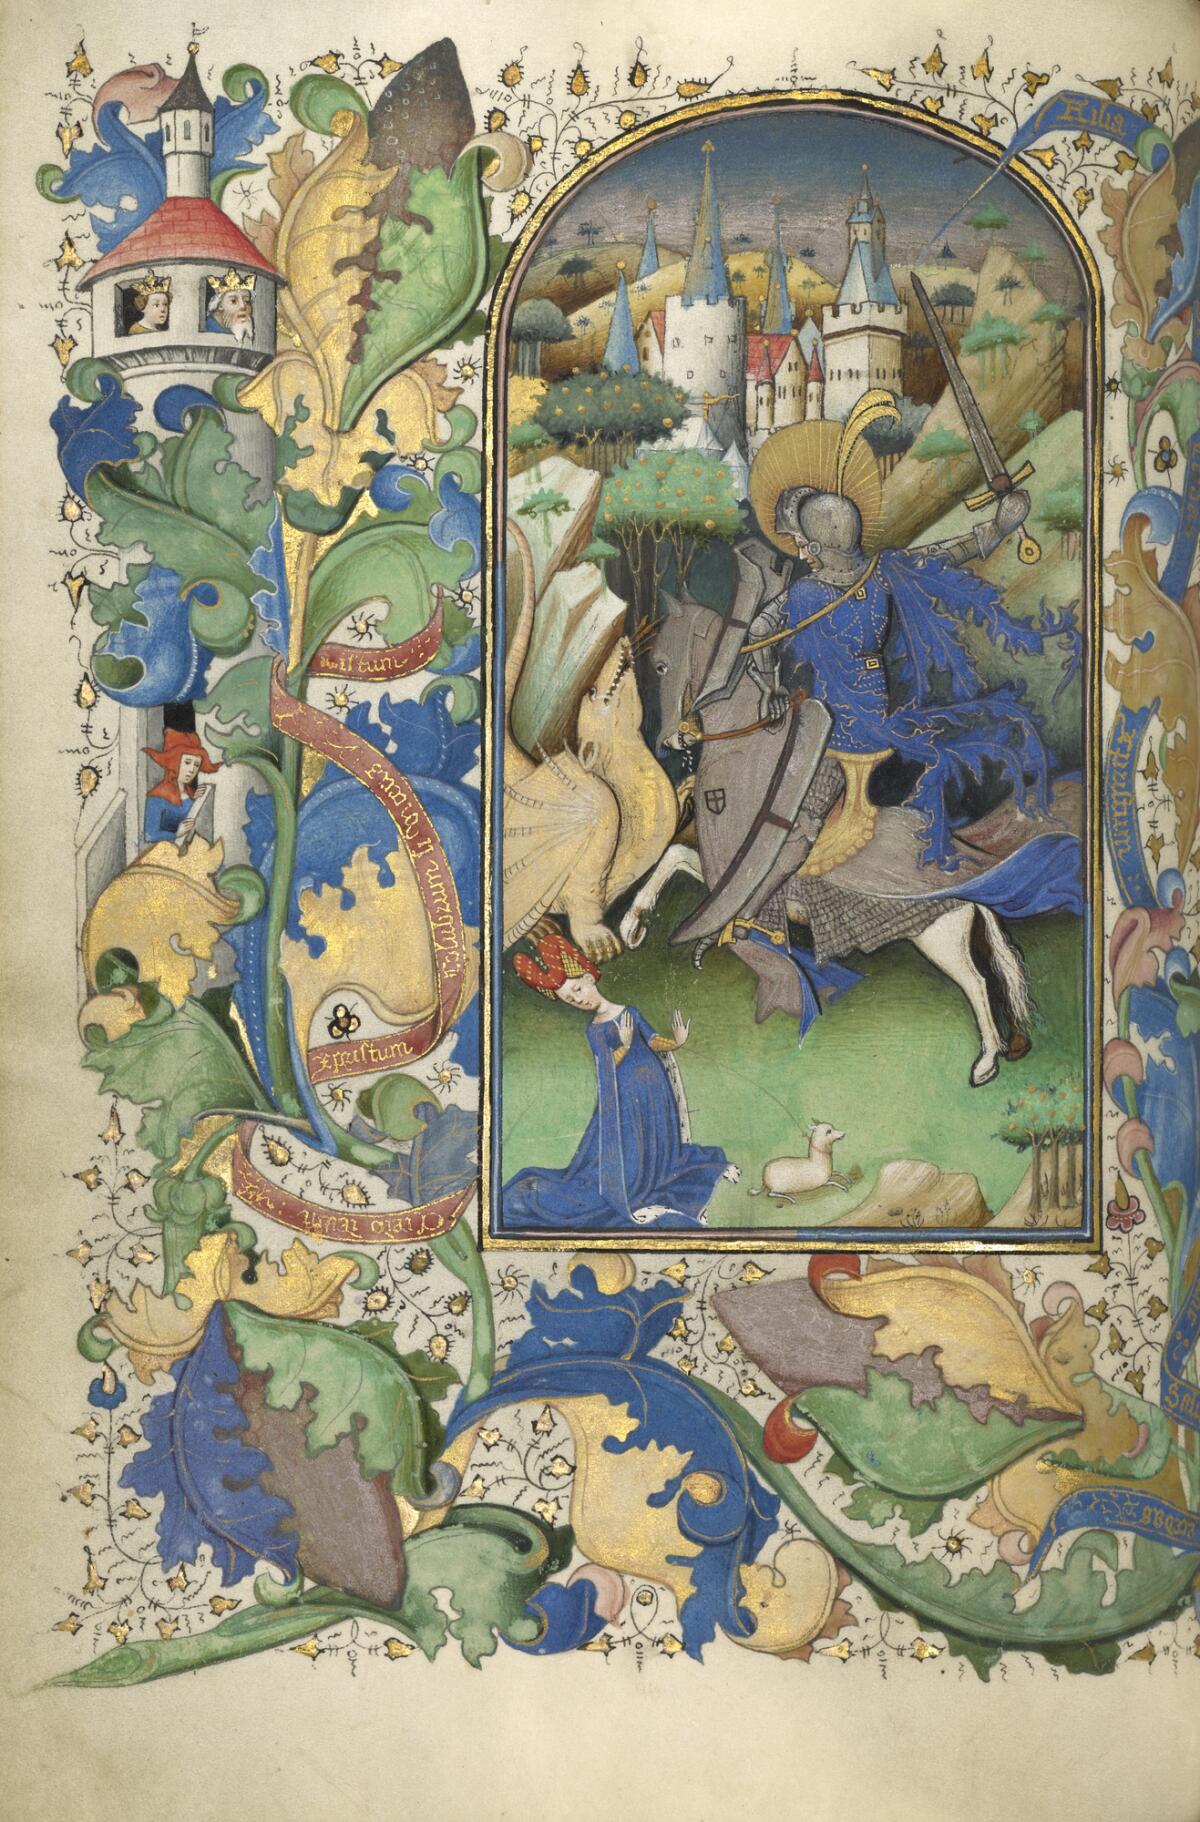 A colorful illustration of a knight on horseback battling a winged dragon.